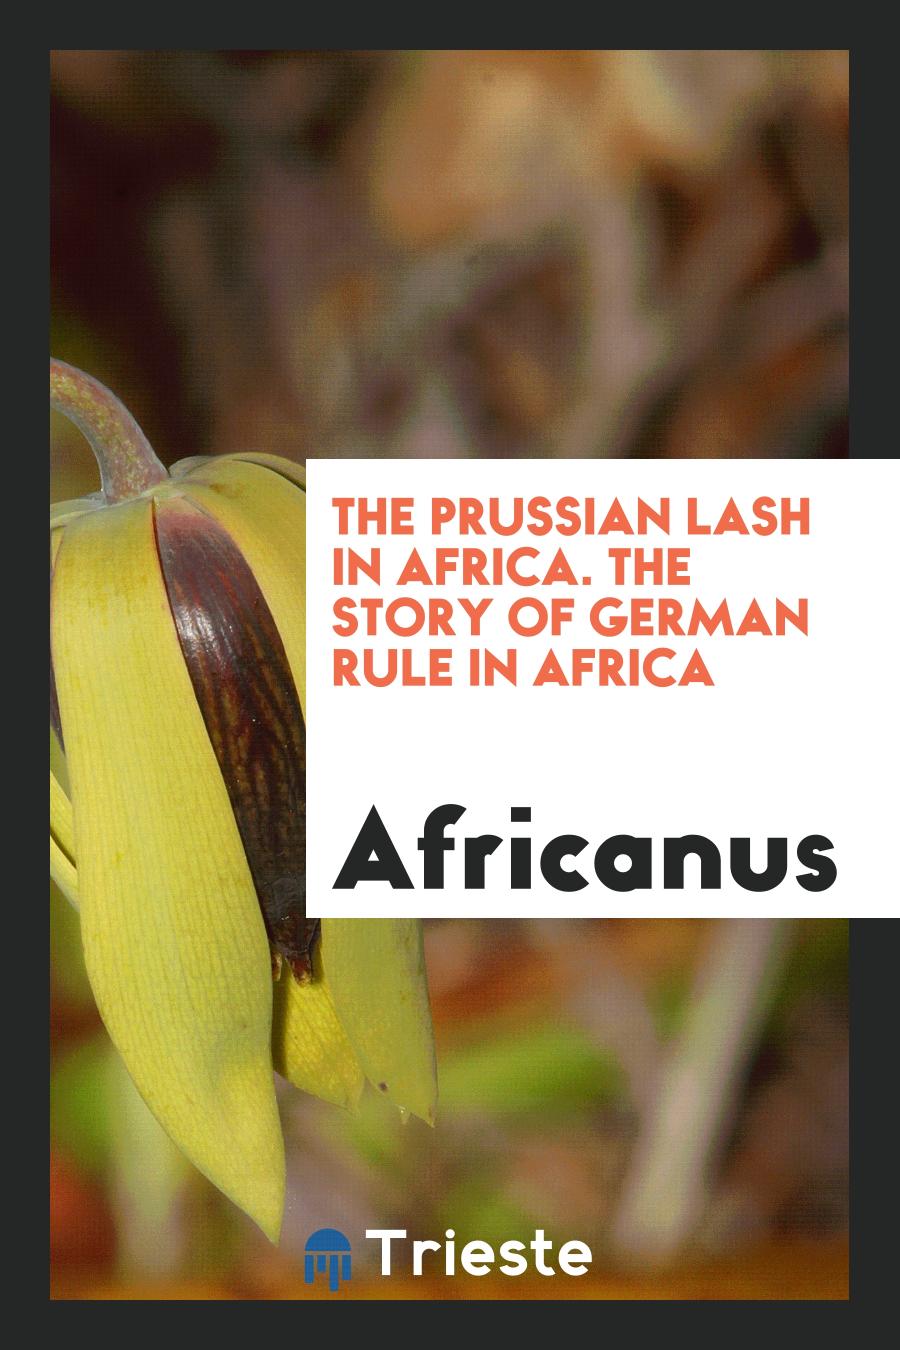 The Prussian Lash in Africa. The Story of German Rule in Africa